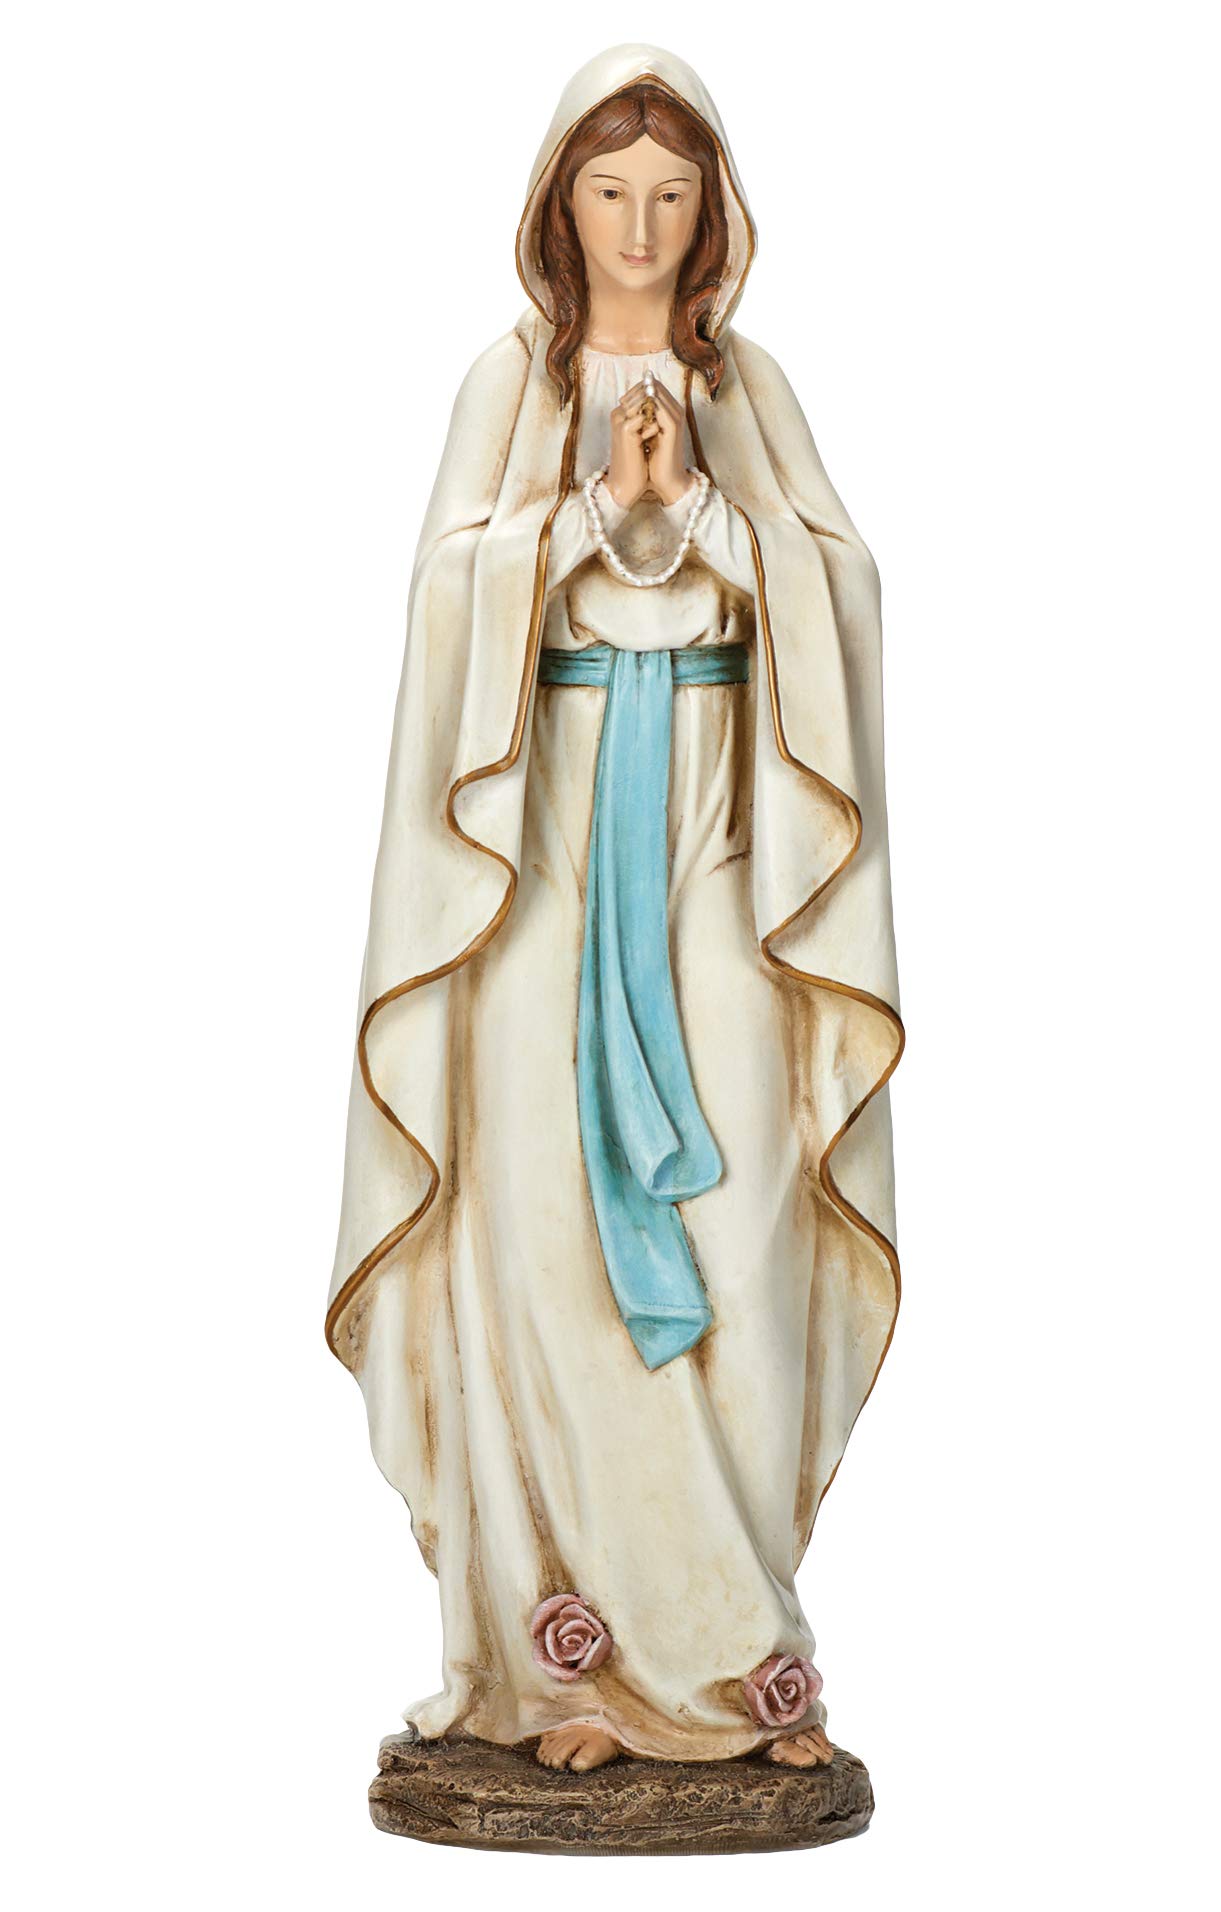 Roman Joseph's Studio Our Lady of Lourdes Figure, for 14" Scale Renaissance Collection, 13.5" H, Resin and Stone, Religious Gift, Decor...